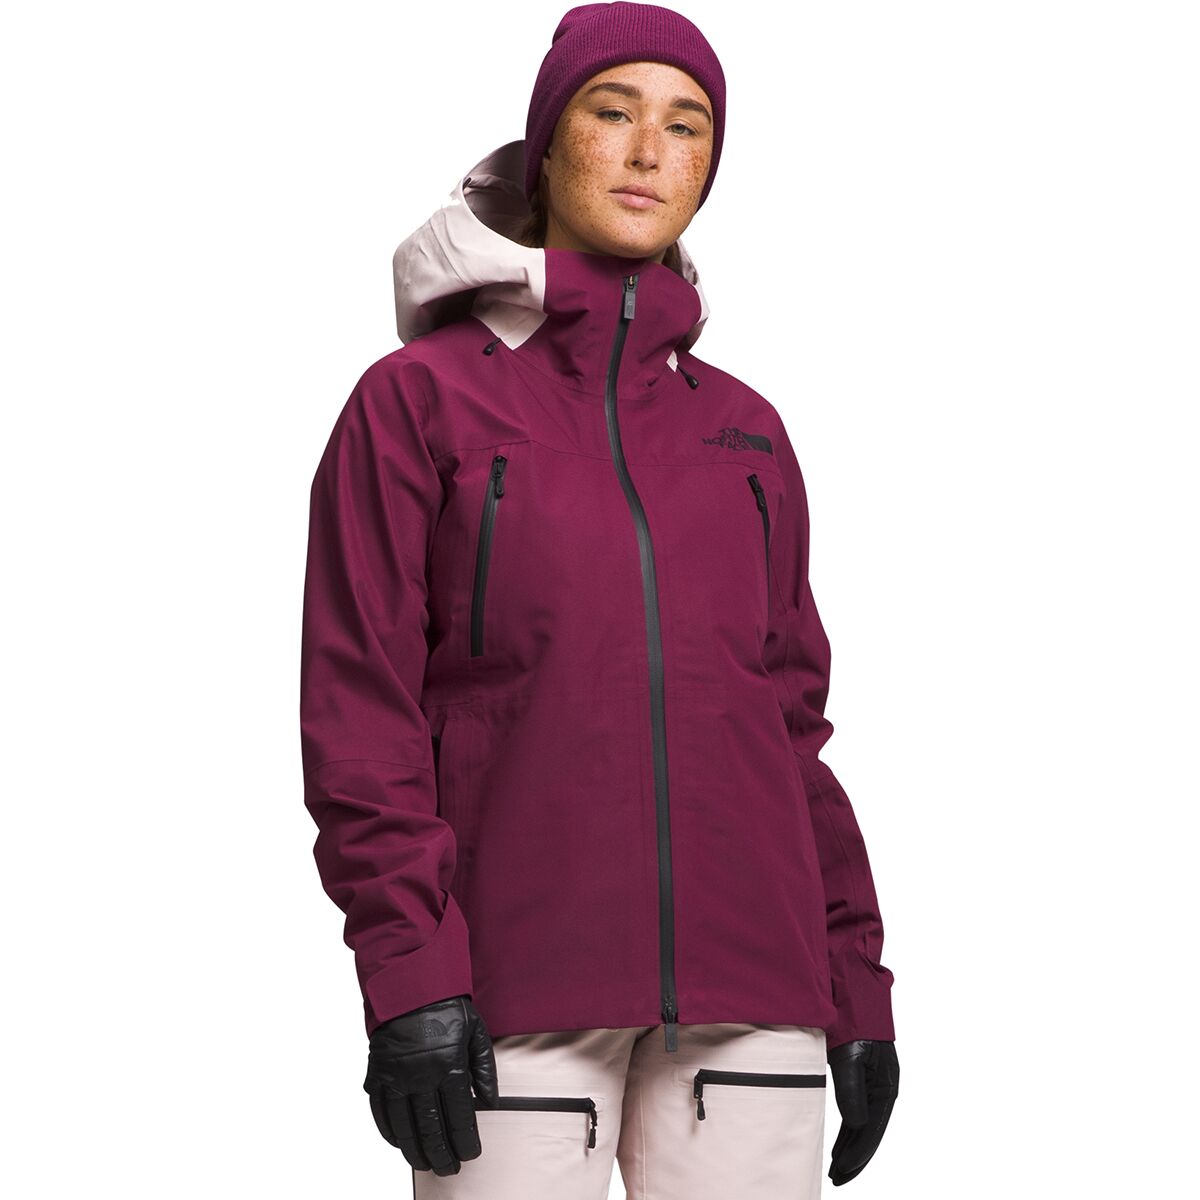 The North Face Ceptor Jacket - Women's Boysenberry